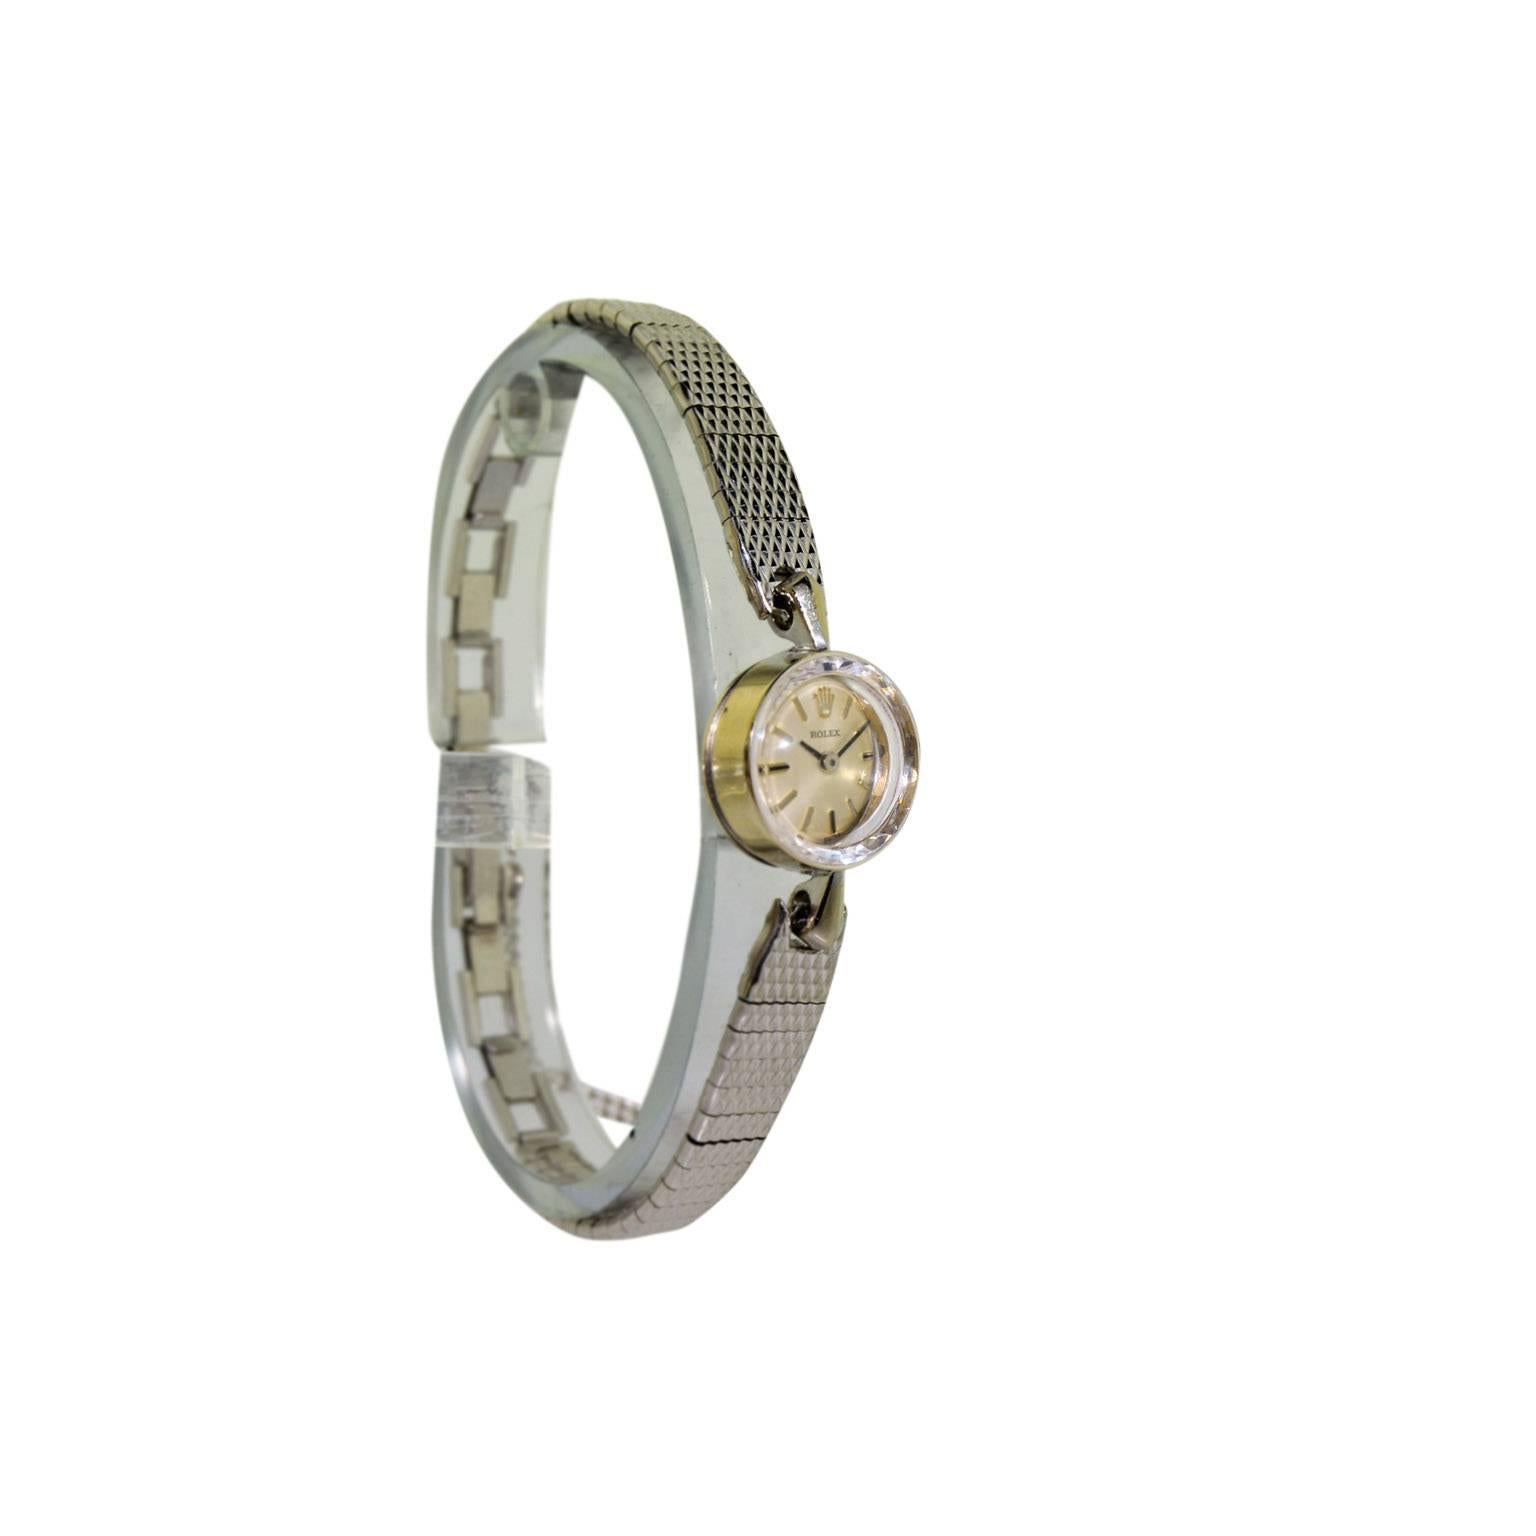 faceted crystal watch